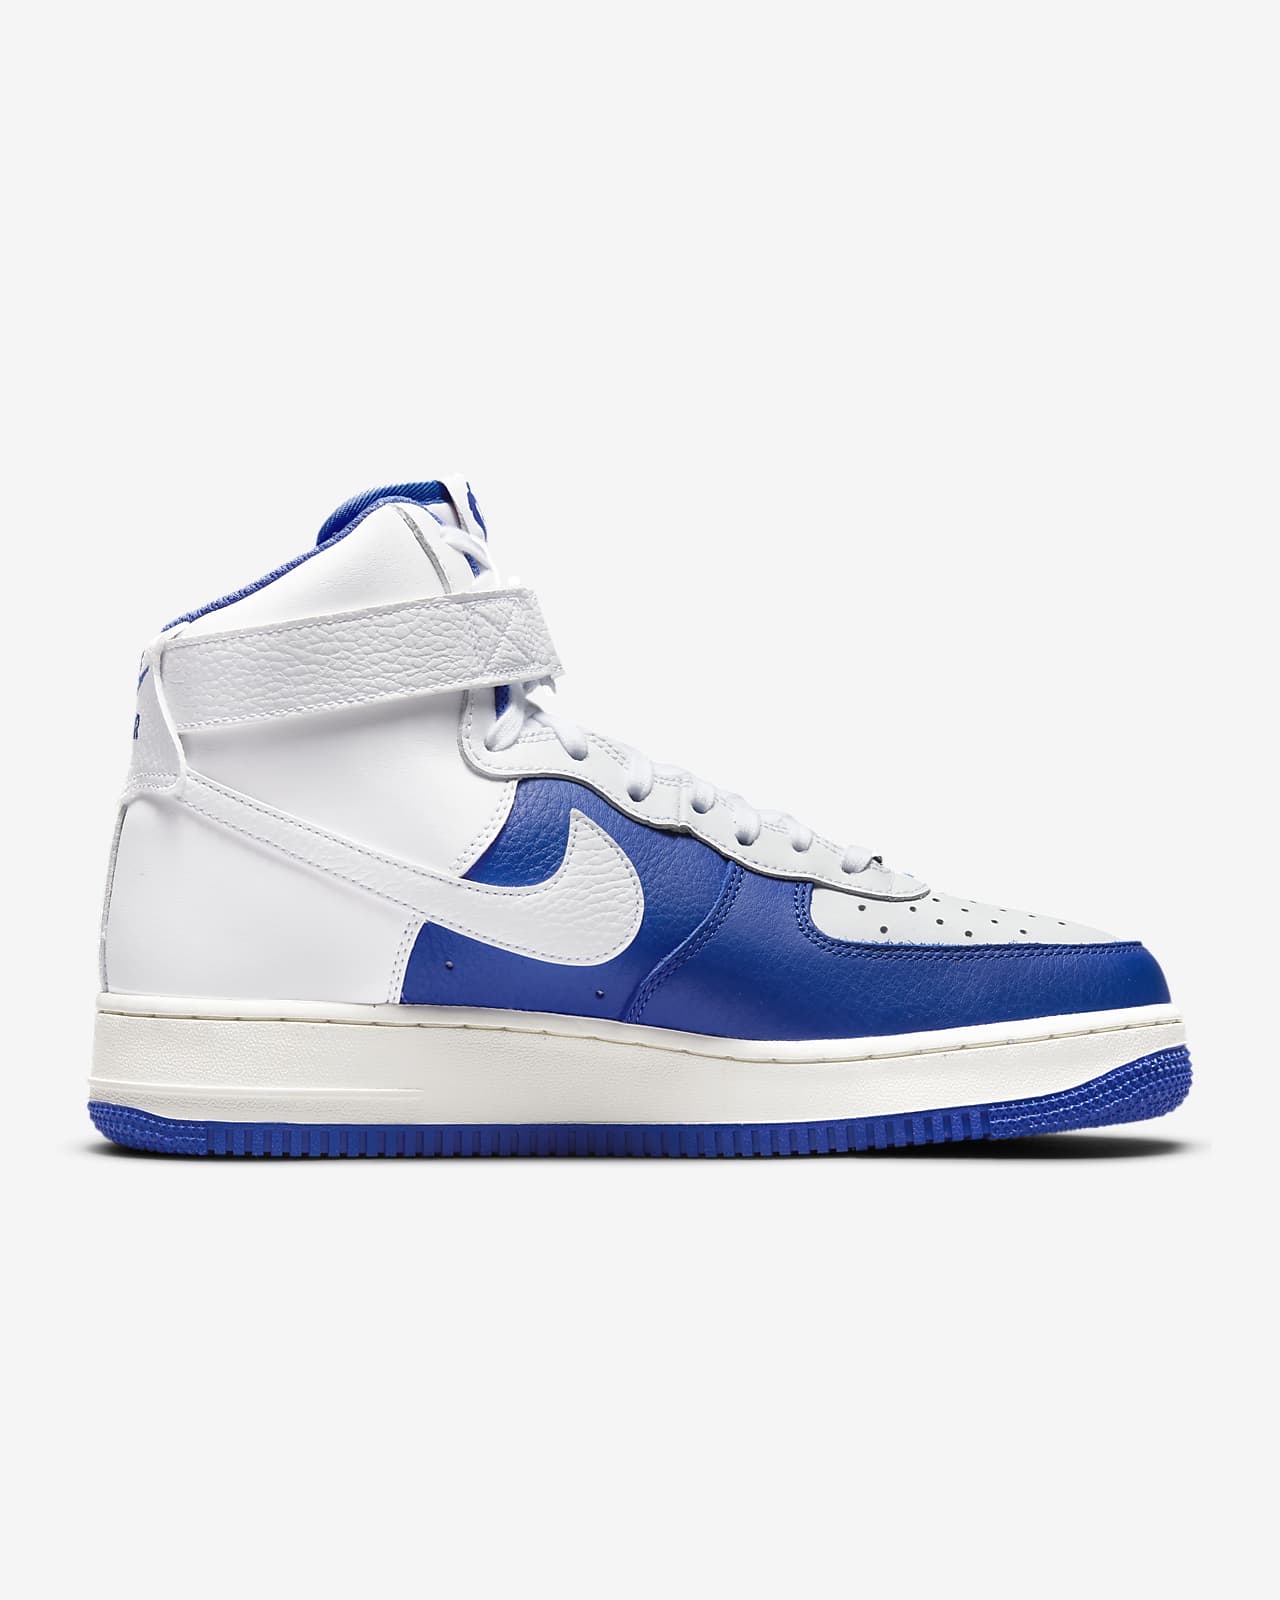 Nike Air Force 1 High ' LV8 Men's Shoes